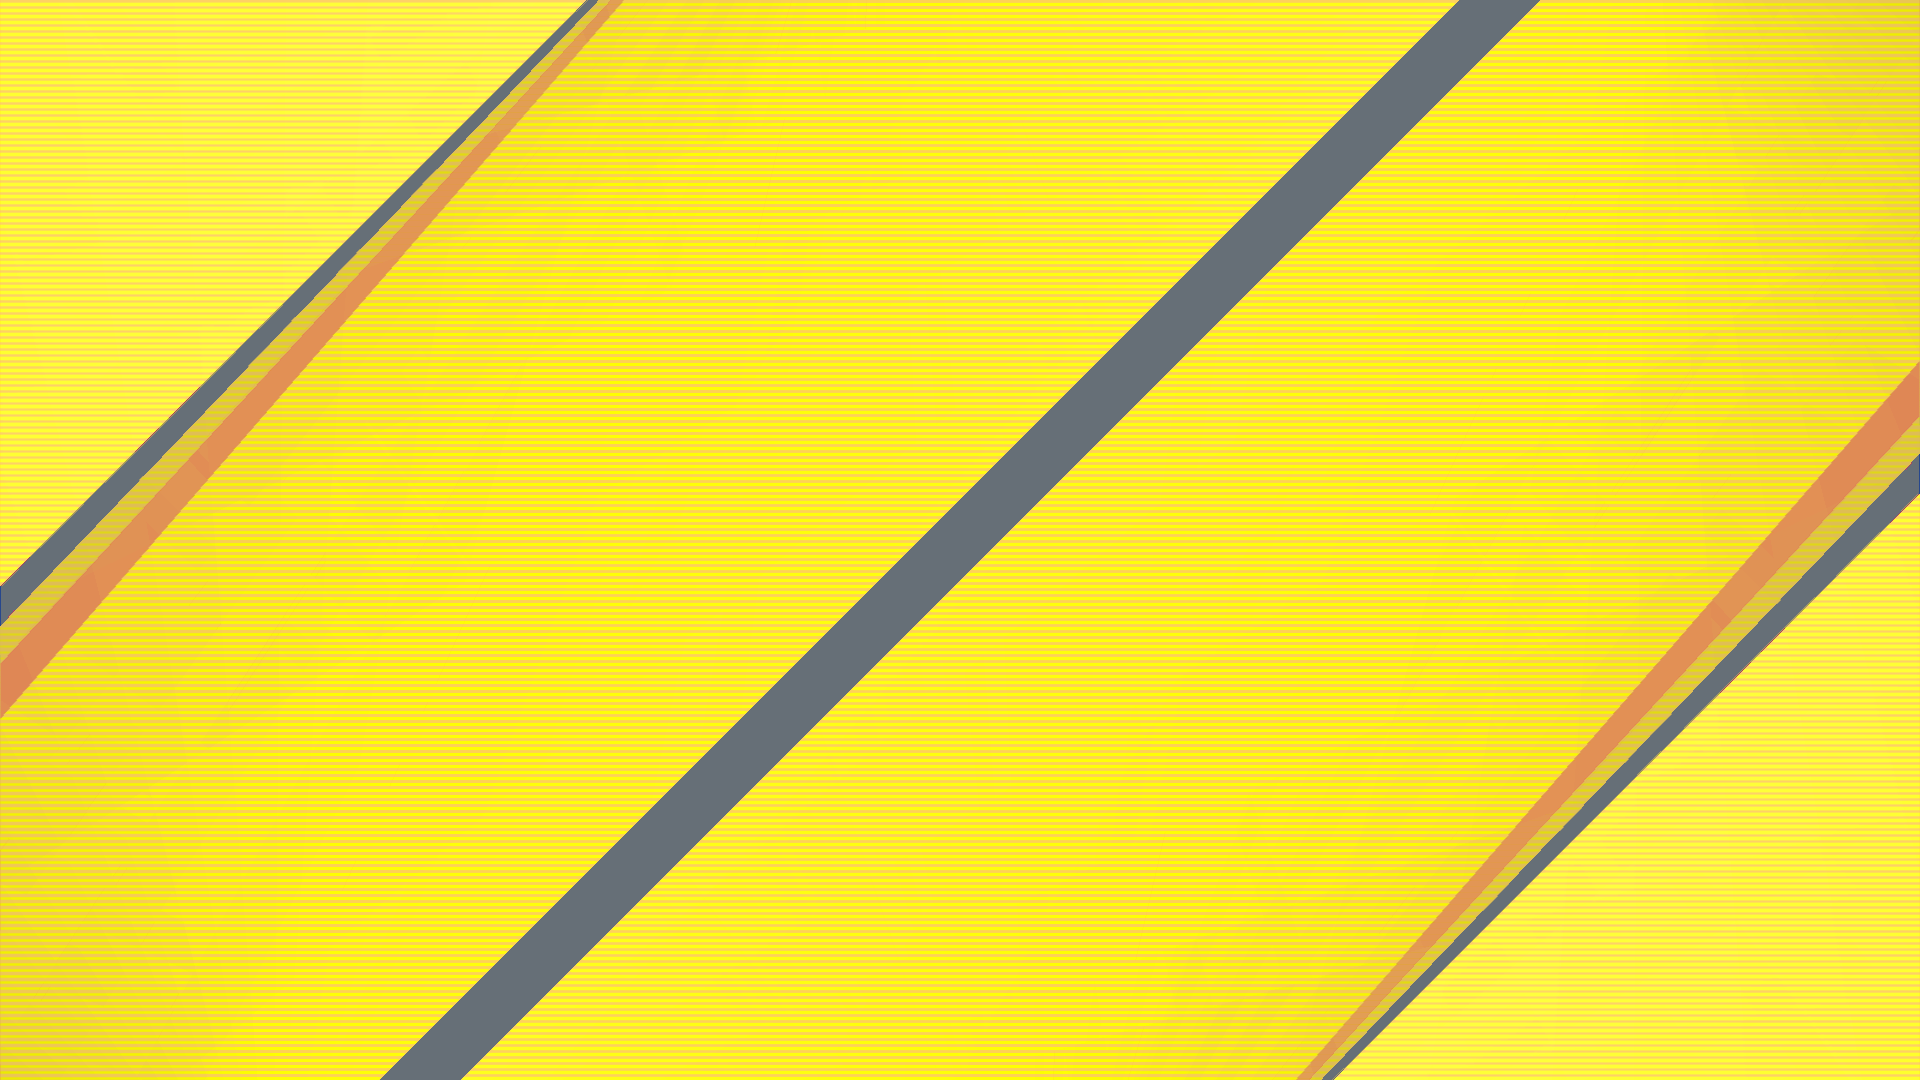 General 1920x1080 lines minimalism yellow background texture